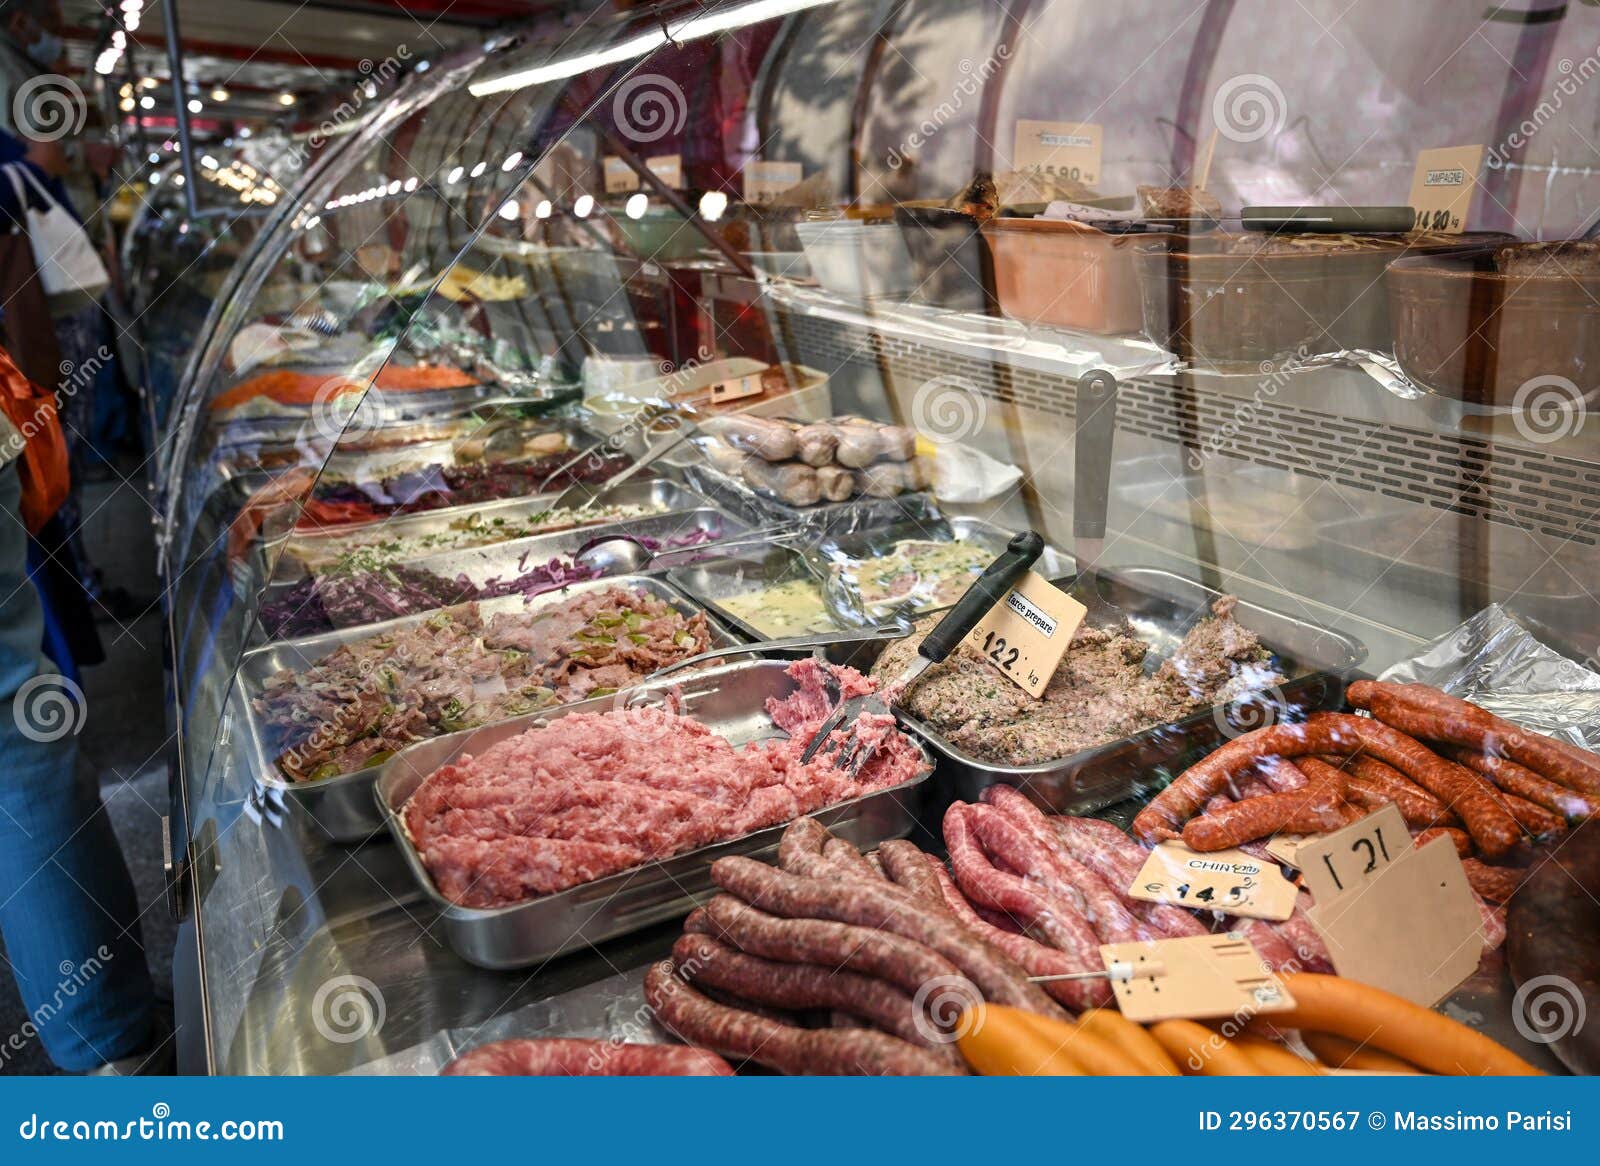 paris, france. june 30 2022. at the beautiful marchÃ¨ popincourt local market, a delicatessen counter with sausages, meat pie,